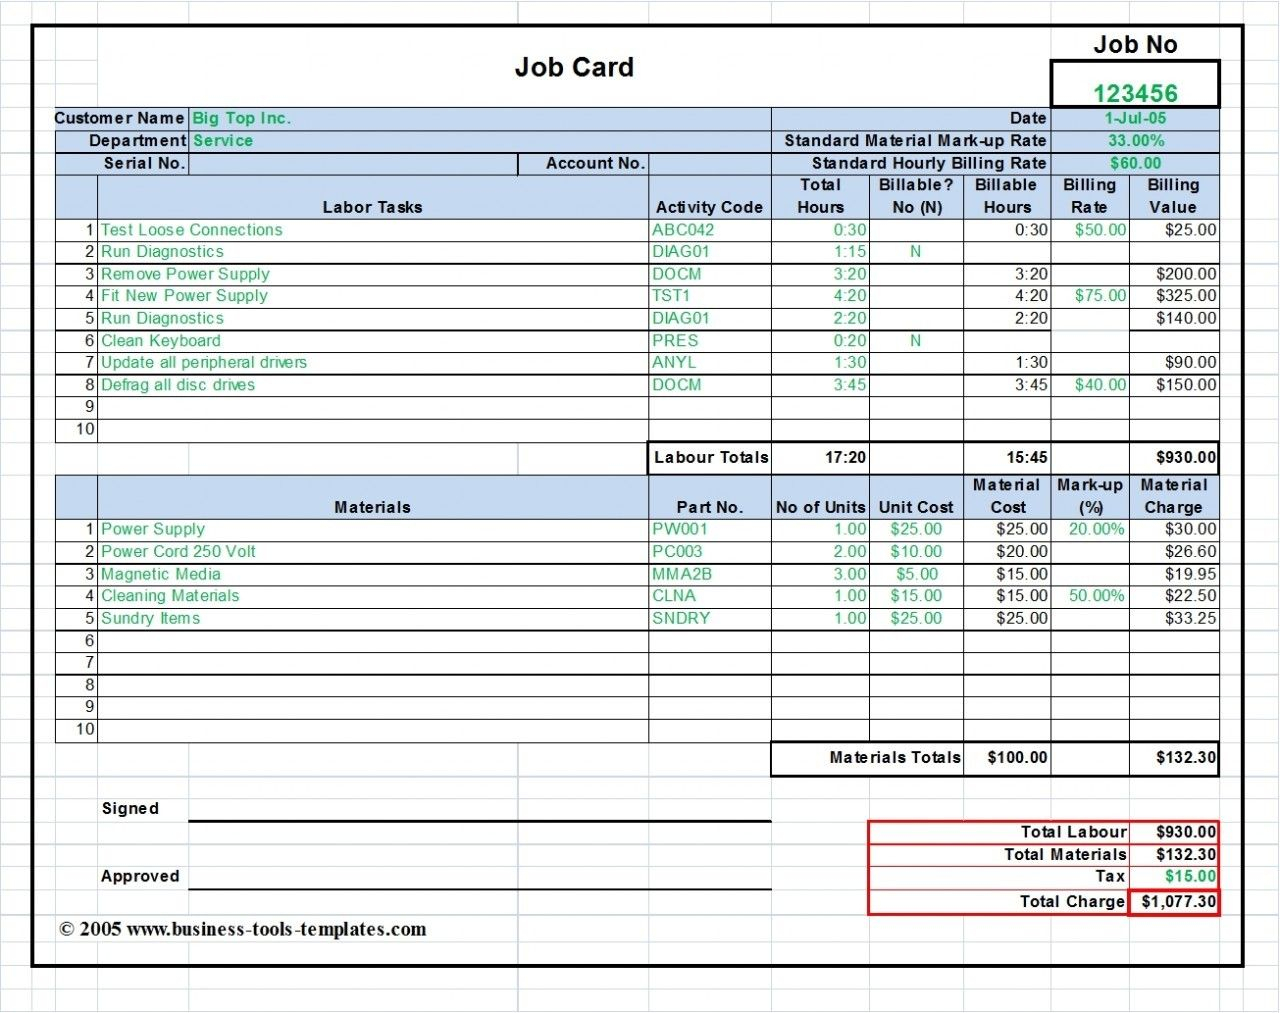 Workshop Job Card Template Excel, Labor & Material Cost Intended For Mechanics Job Card Template